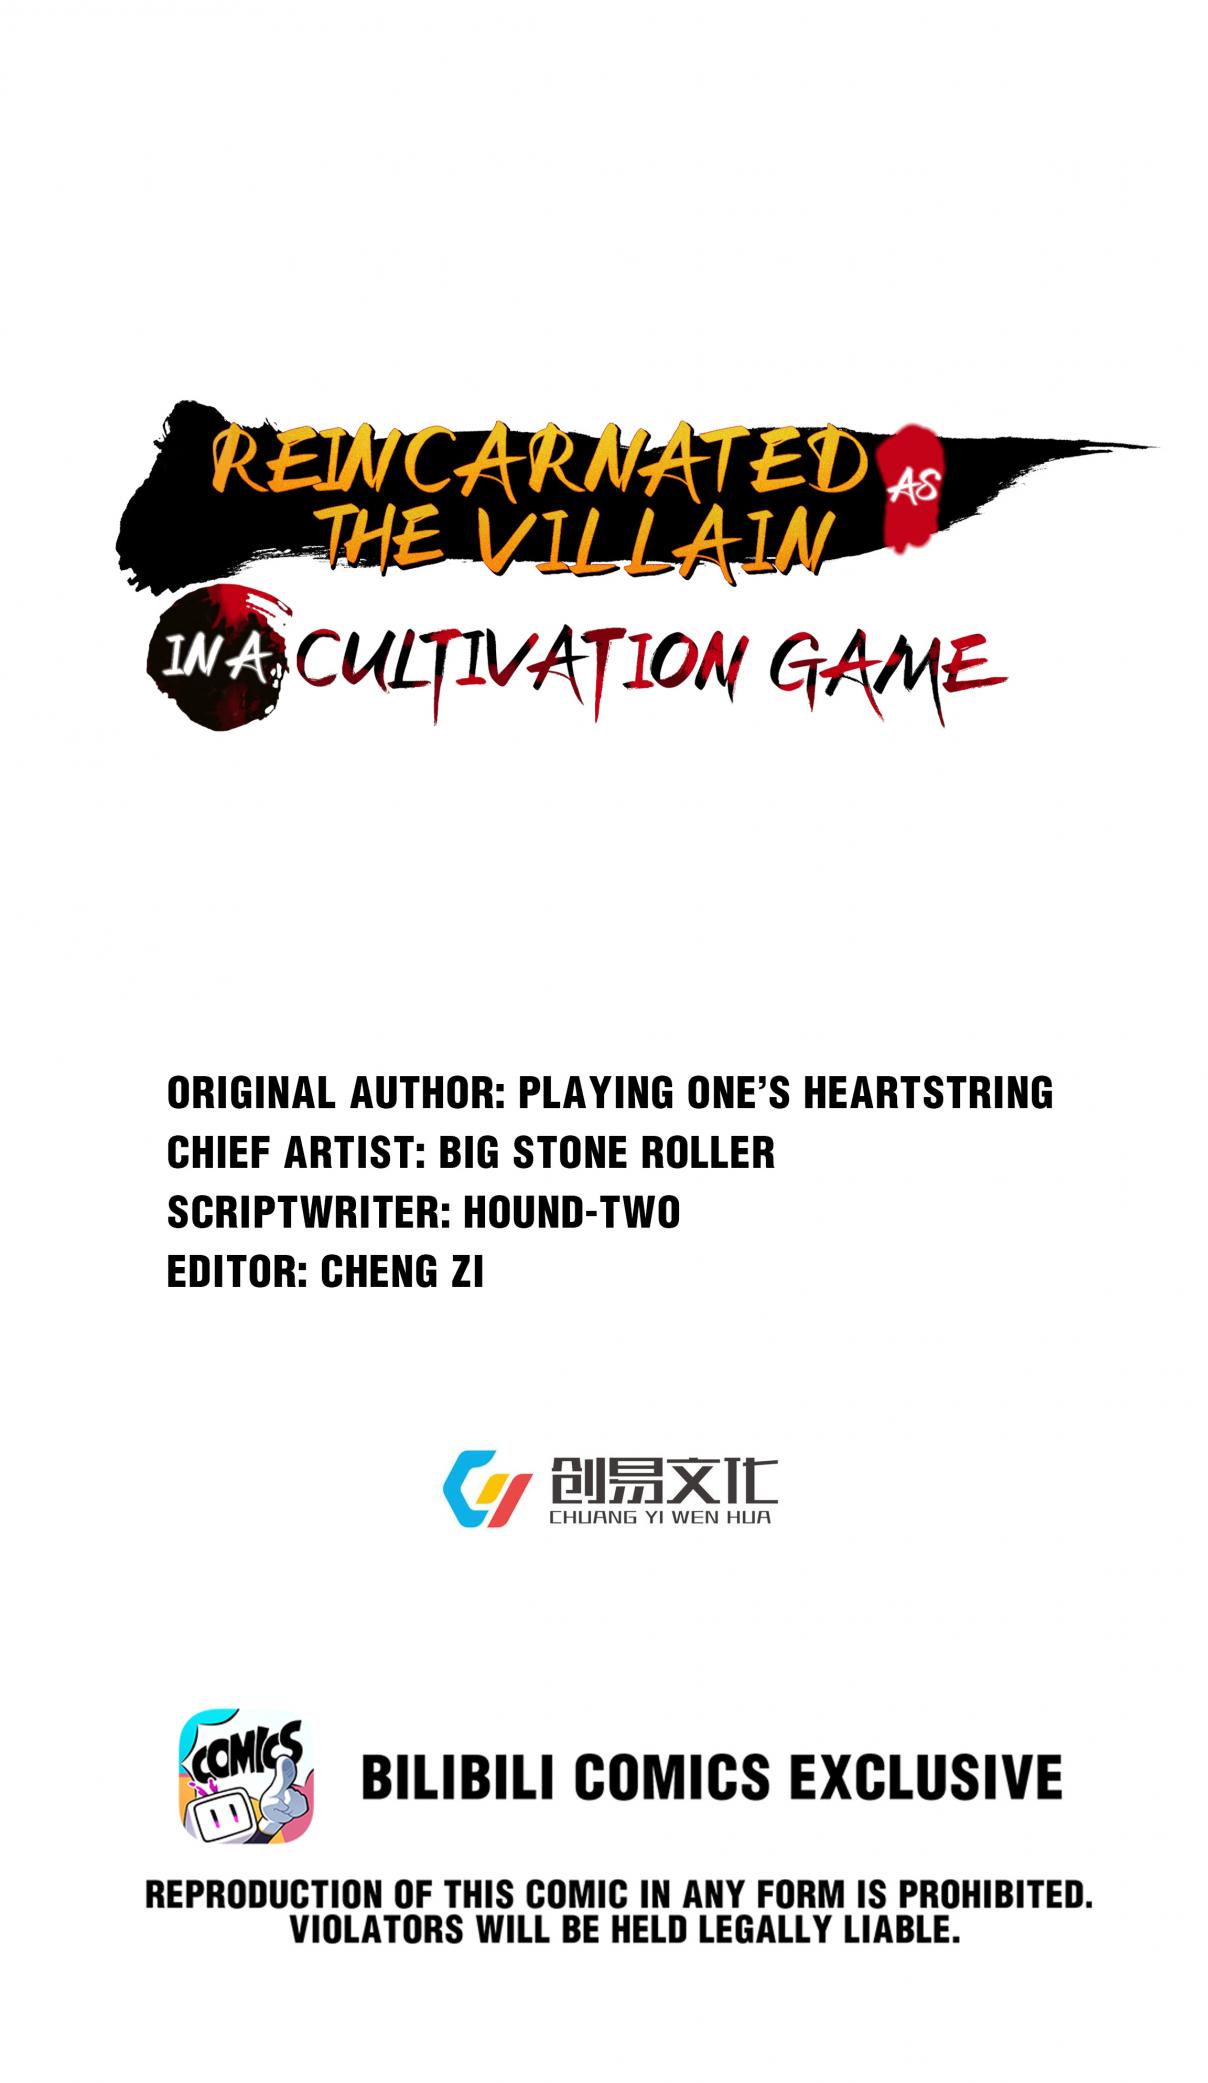 Reincarnated as the Villain in a Cultivation Game 48